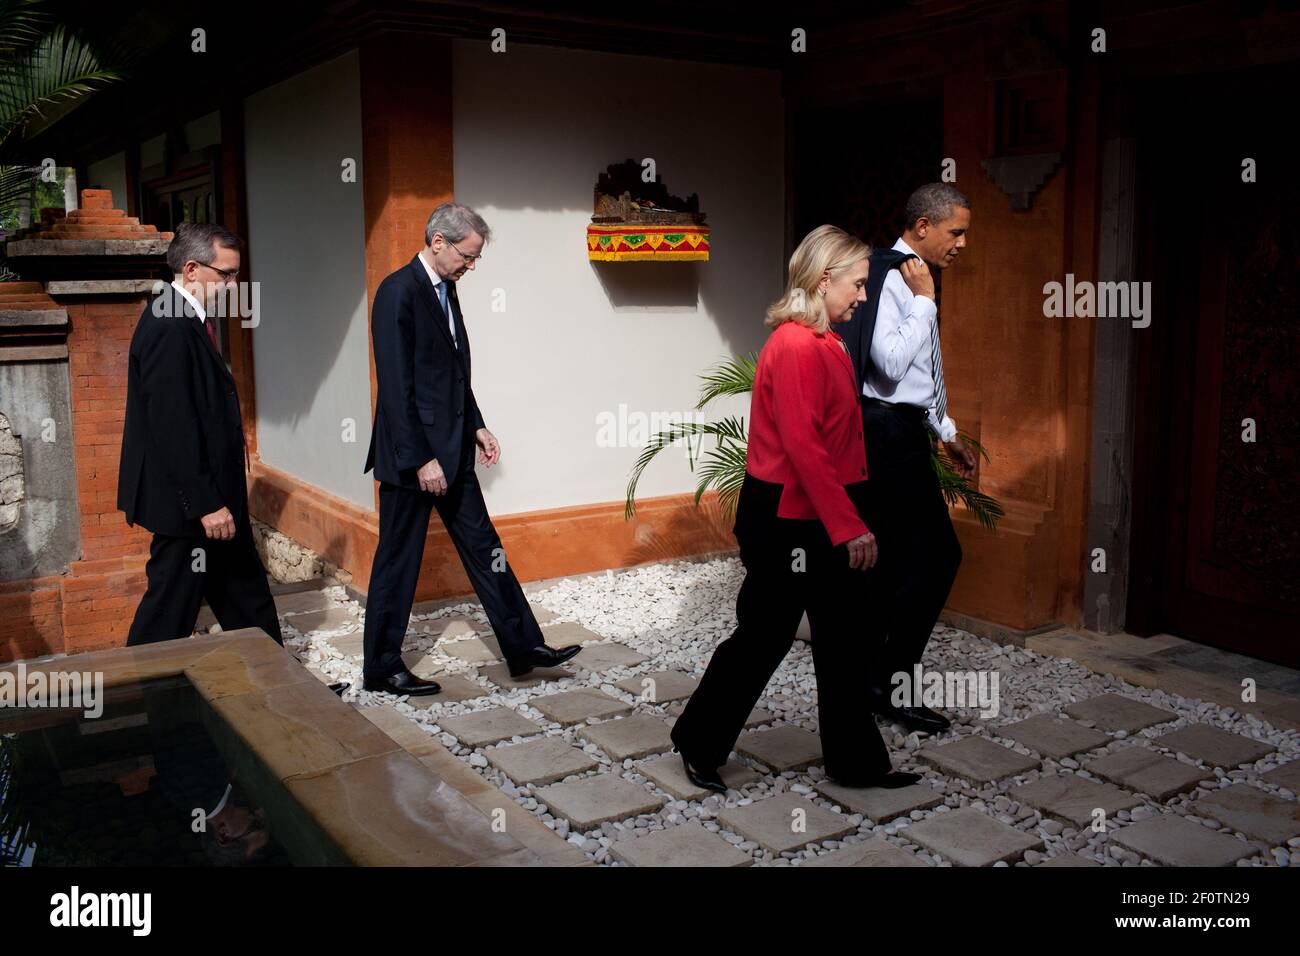 President Barack Obama walks with Secretary of State Hillary Rodham Clinton Ambassador David Carden US Mission to ASEAN and Ambassador to Indonesia Scot Marciel during the ASEAN Summit in Nusa Dua Bali Indonesia Nov. 18 2011. Stock Photo